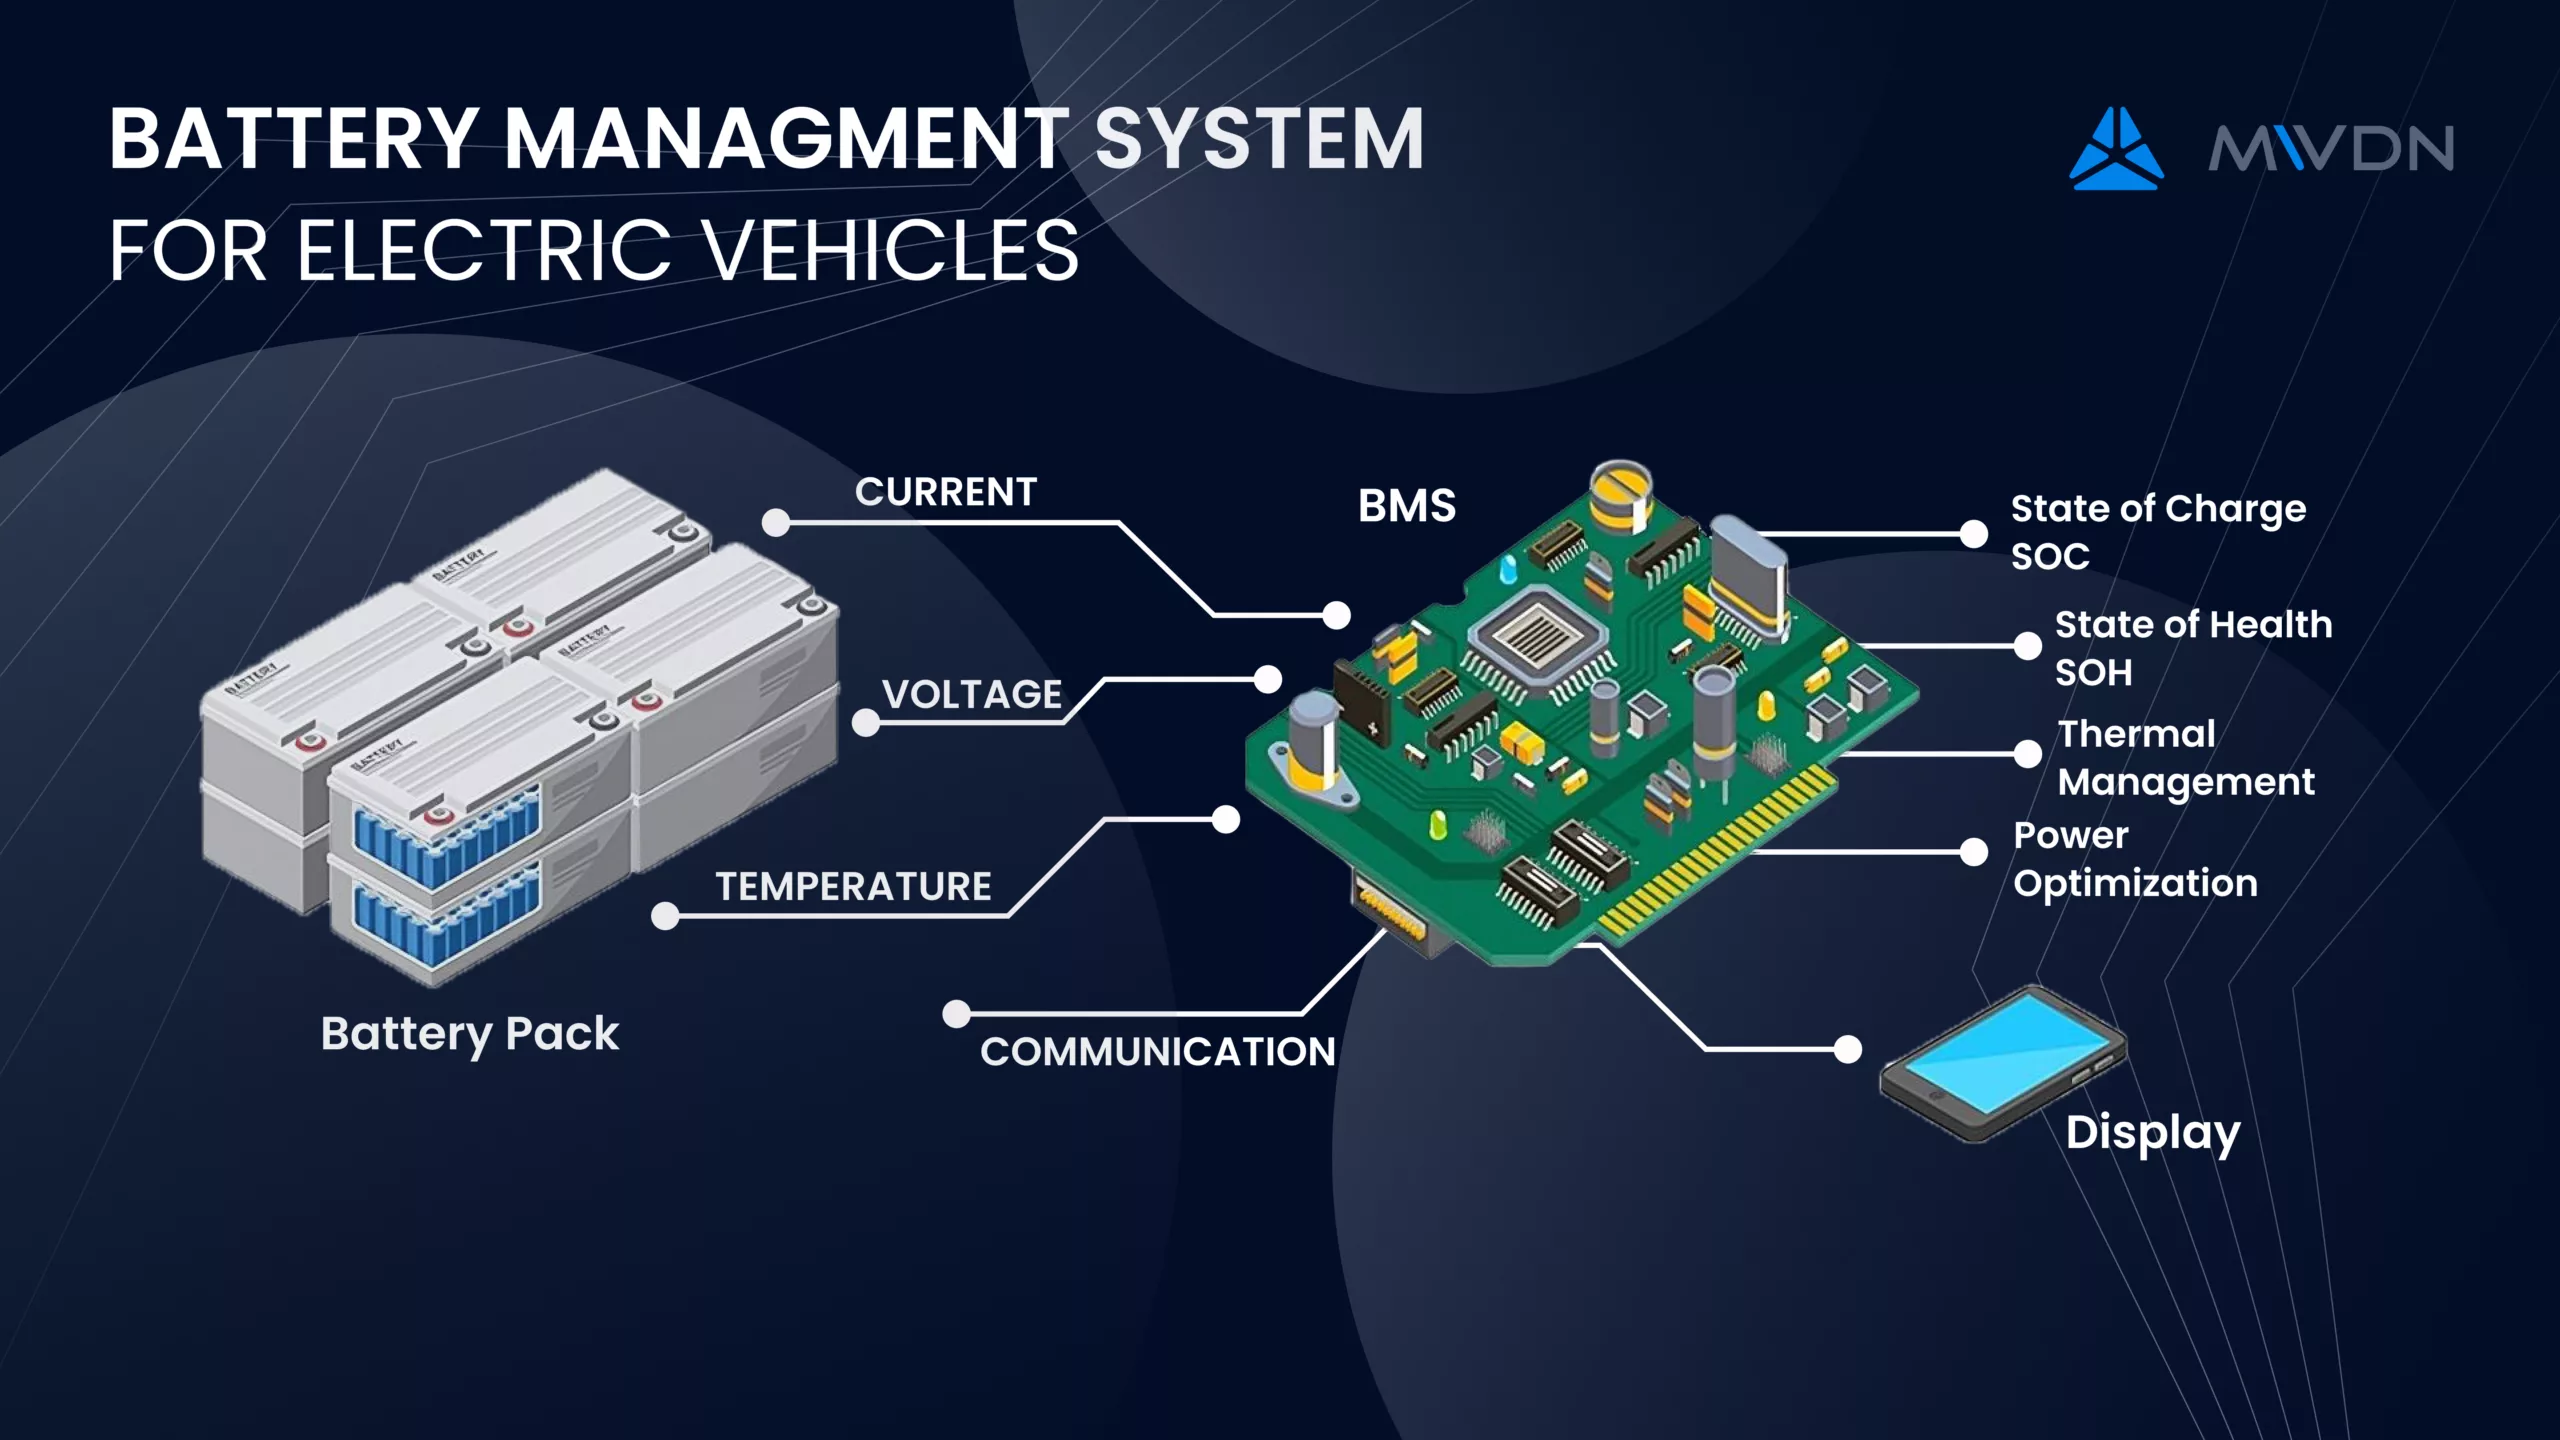 Battery management systems